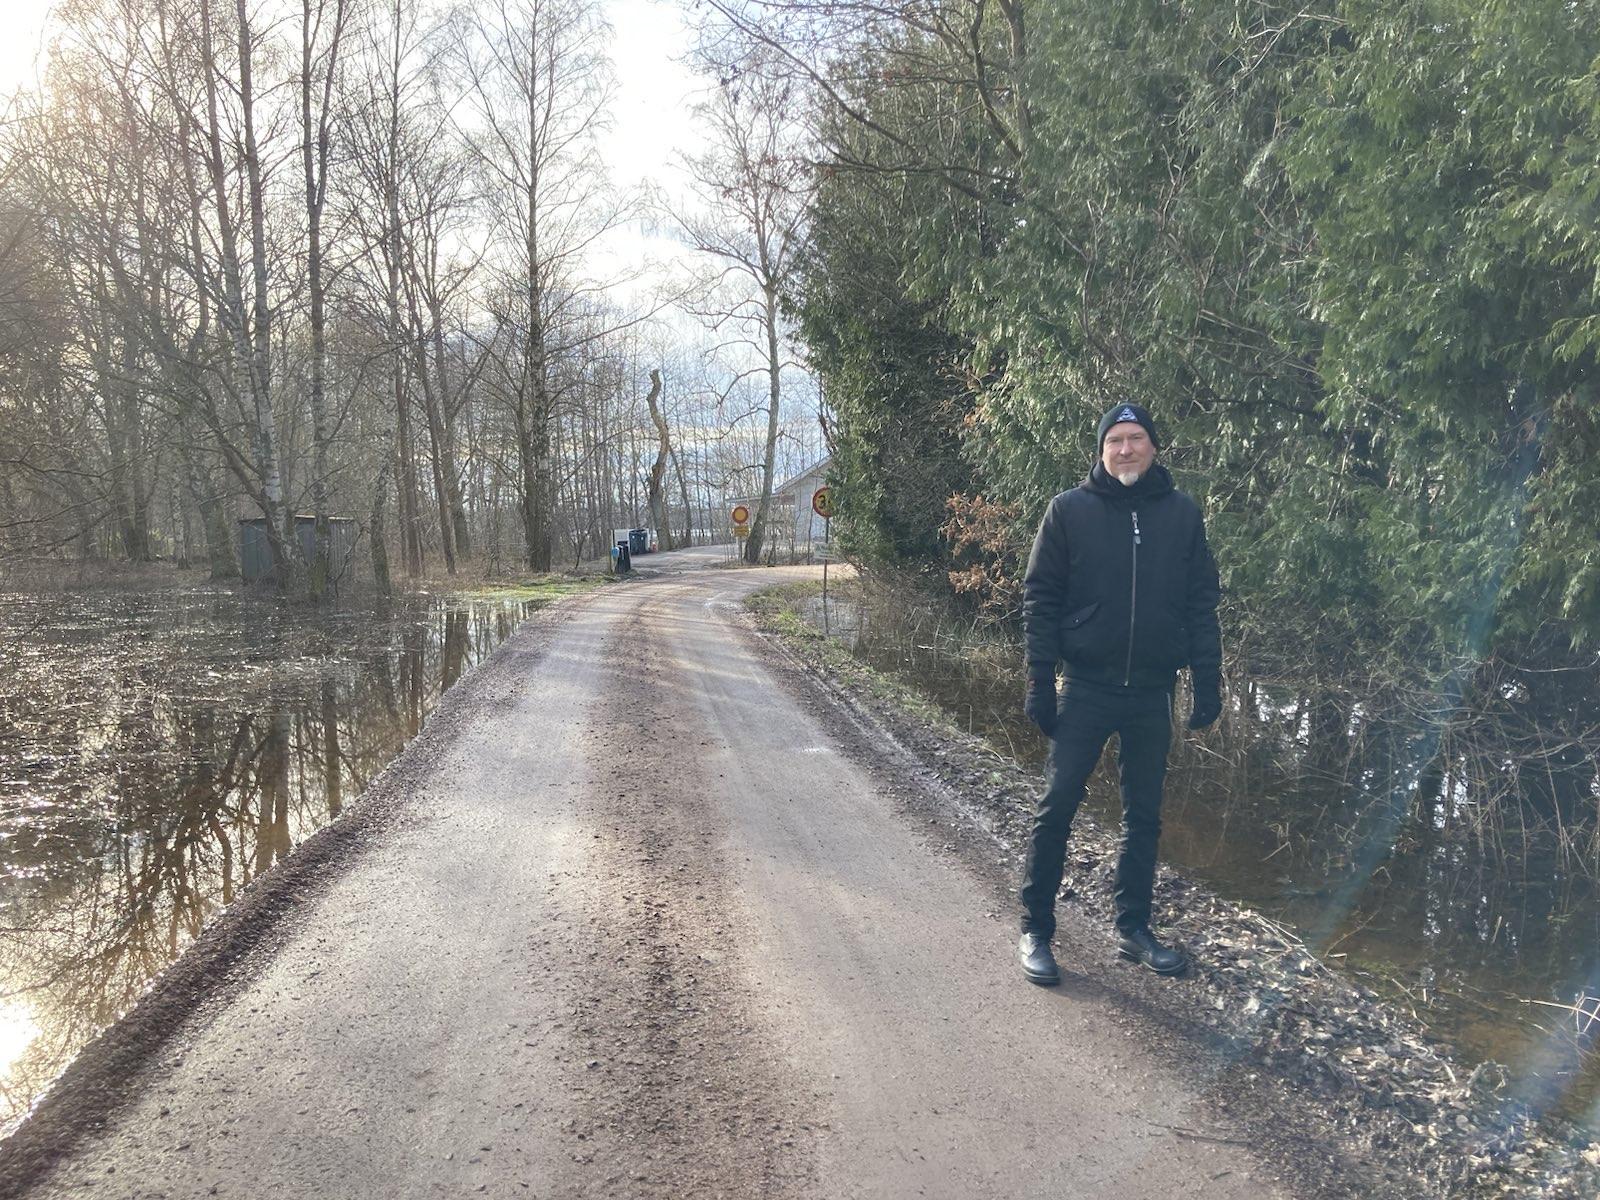 Me, a pale male in black clothing, standing on a gravel road with lots of water in the forest on both sides.